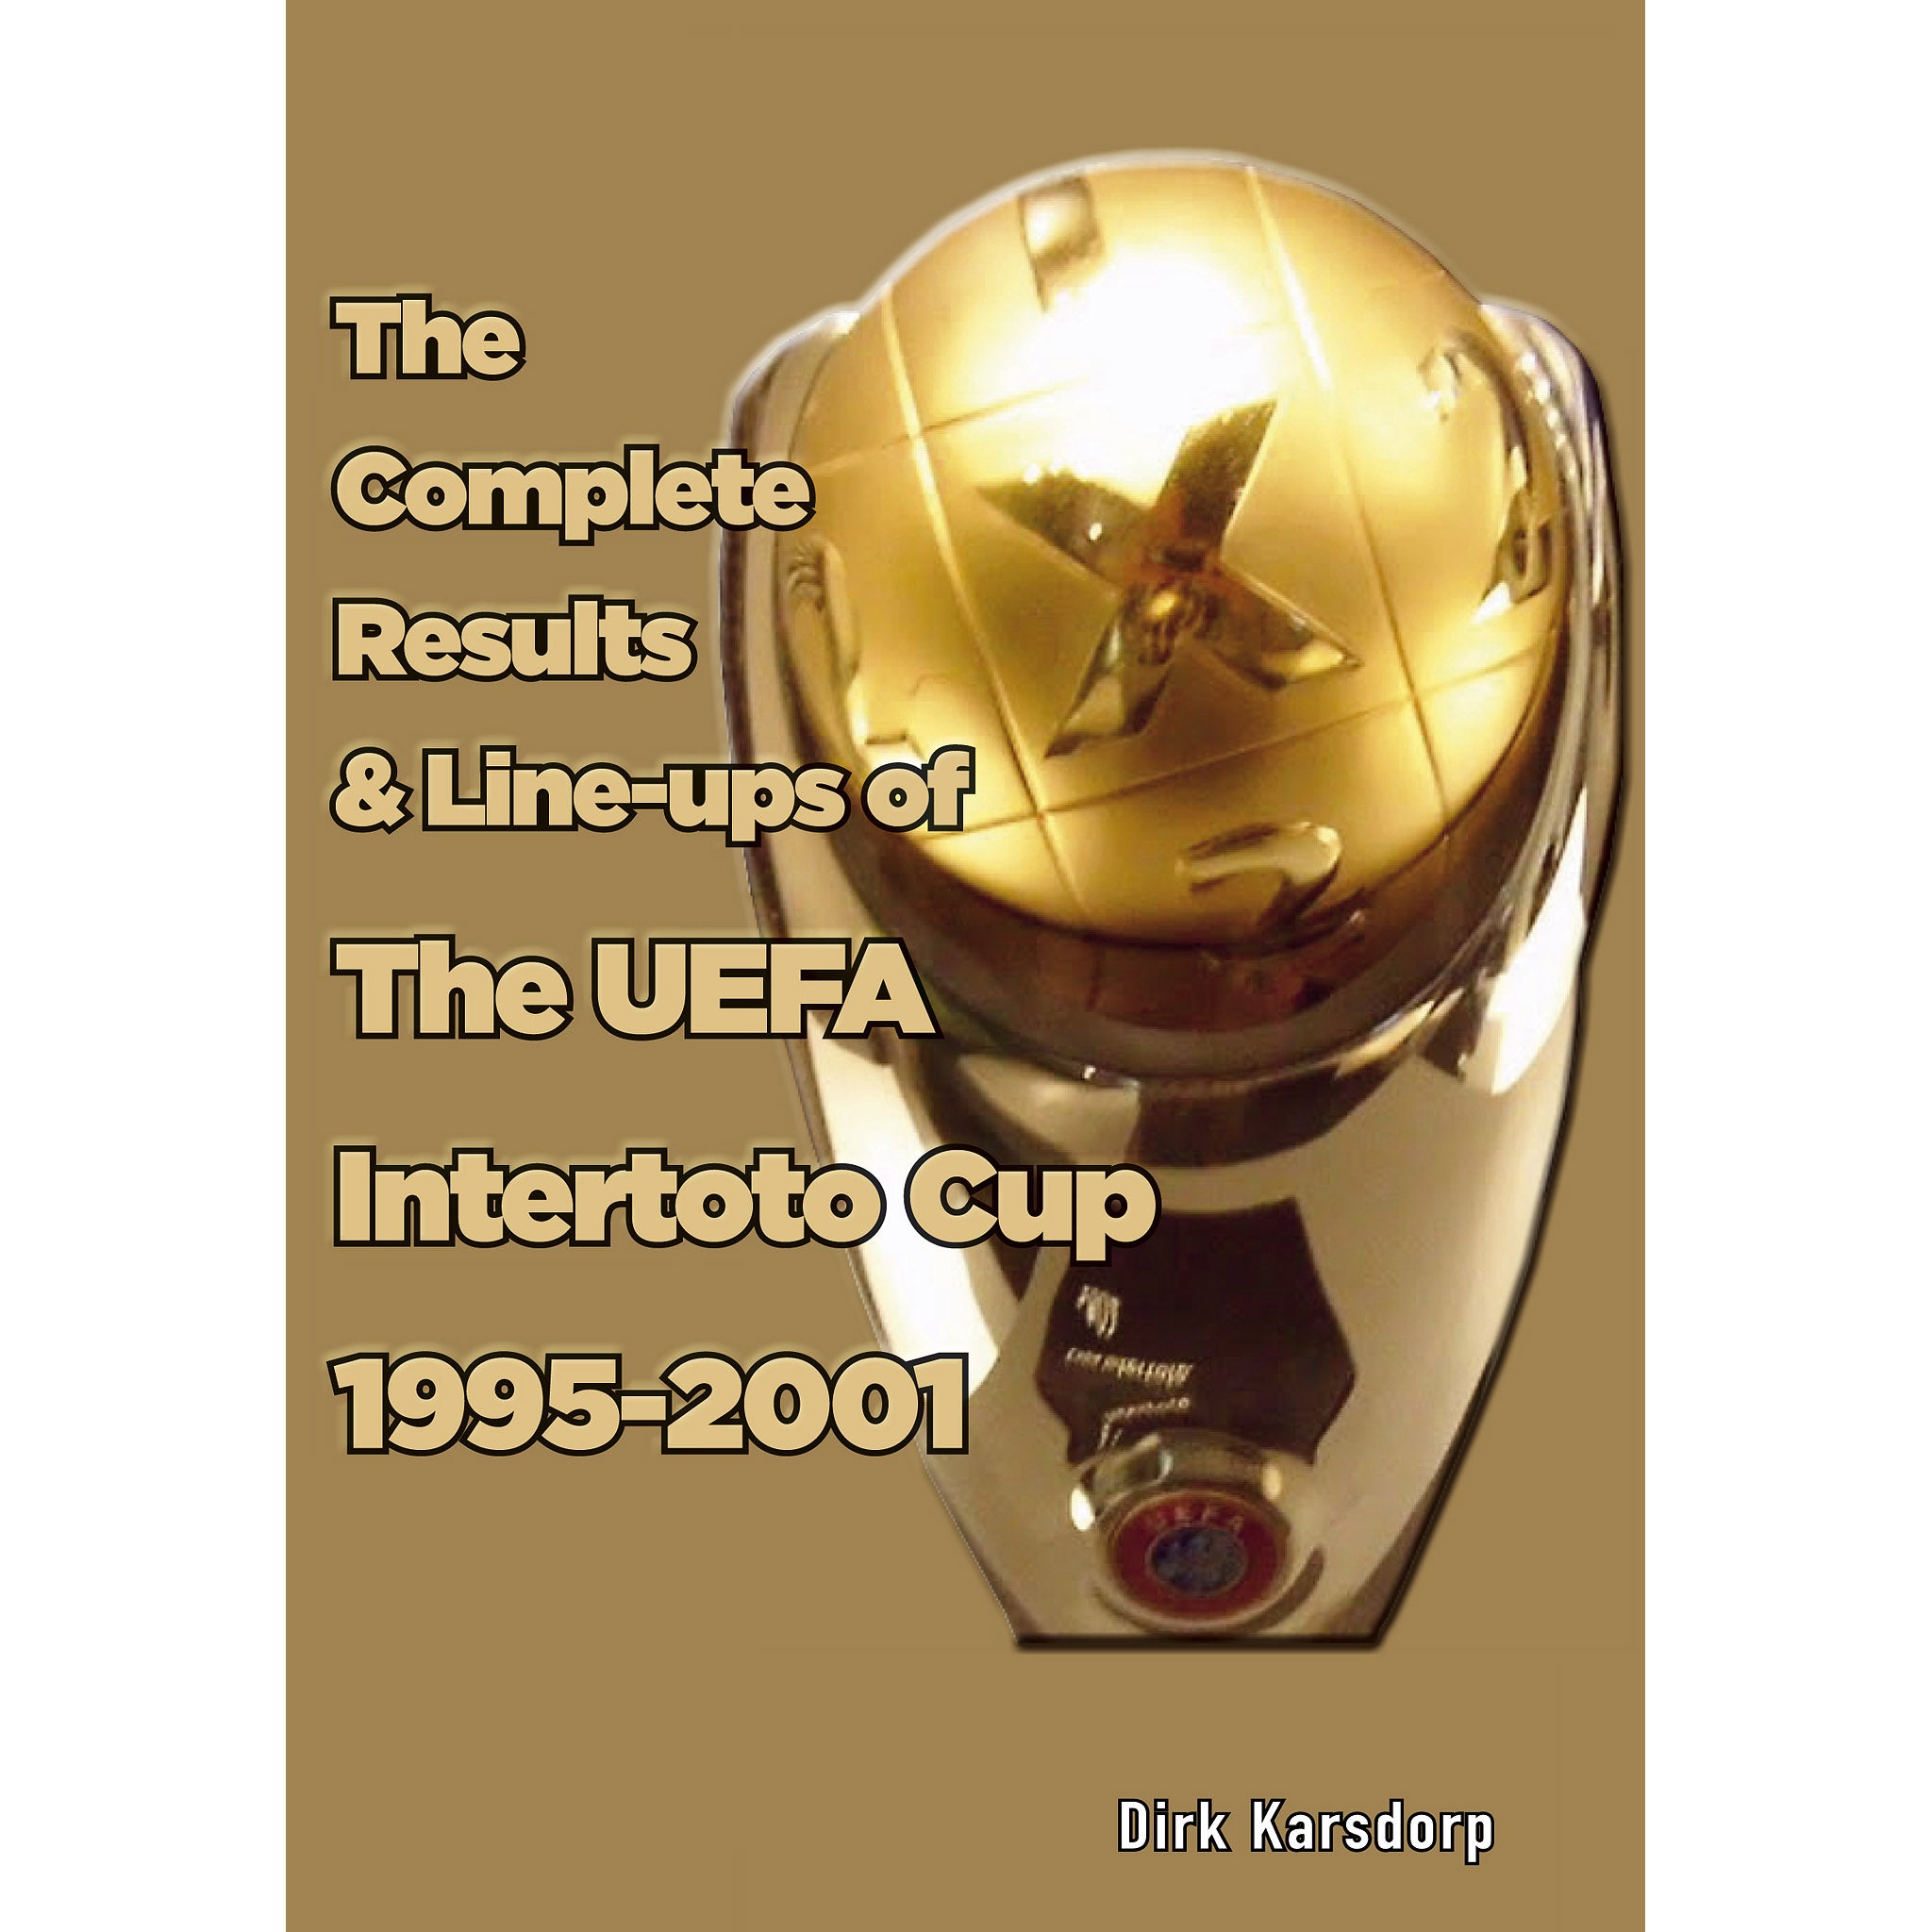 The Complete Results & Line-ups of the UEFA Intertoto Cup 1995-2001